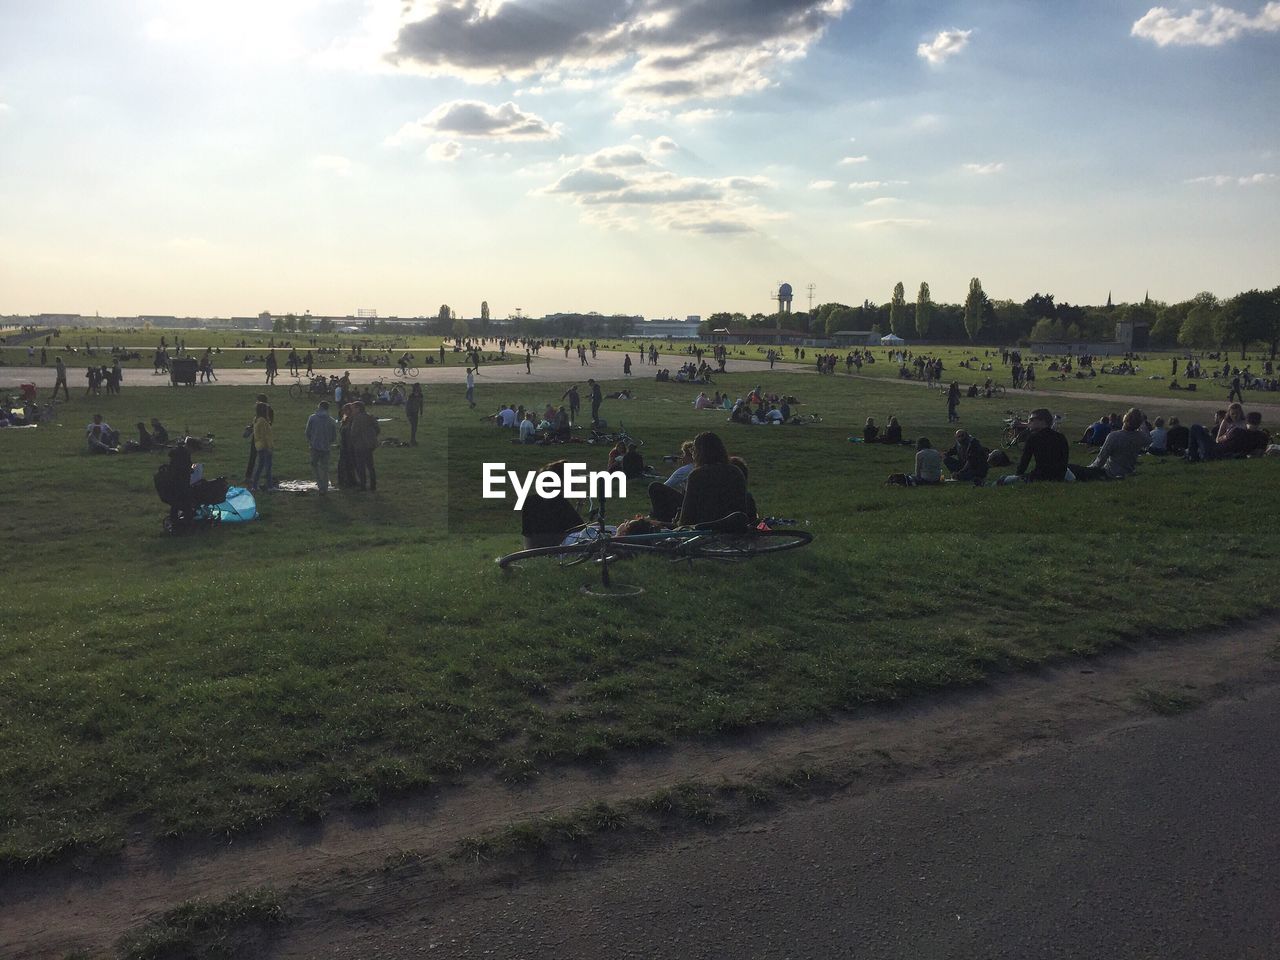 PEOPLE ON GRASSY FIELD AGAINST CLOUDY SKY